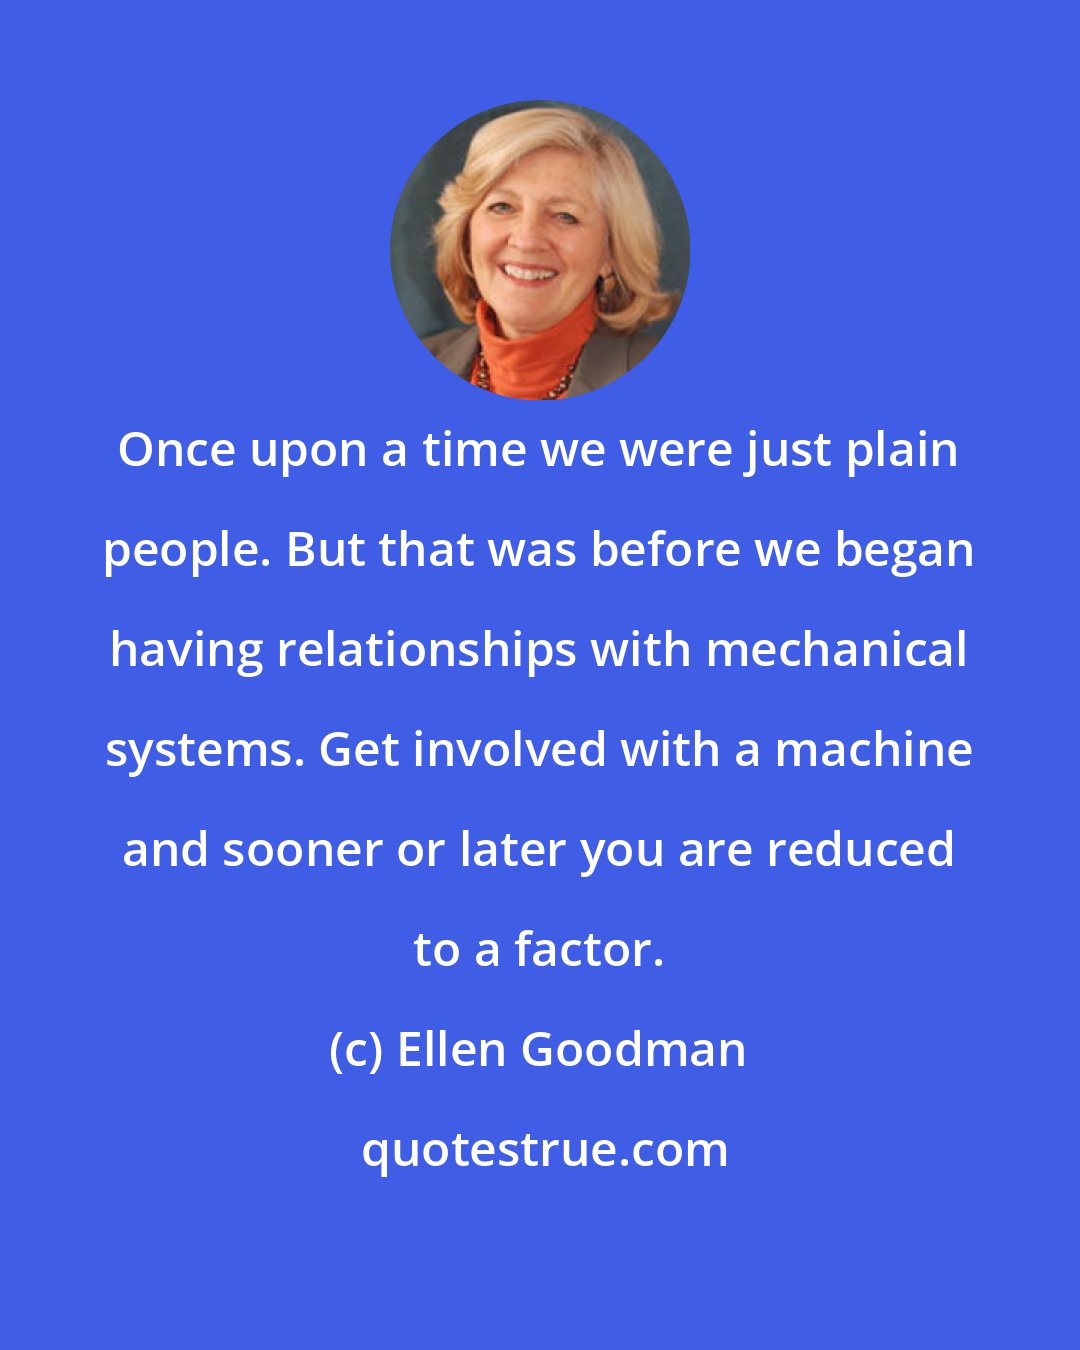 Ellen Goodman: Once upon a time we were just plain people. But that was before we began having relationships with mechanical systems. Get involved with a machine and sooner or later you are reduced to a factor.